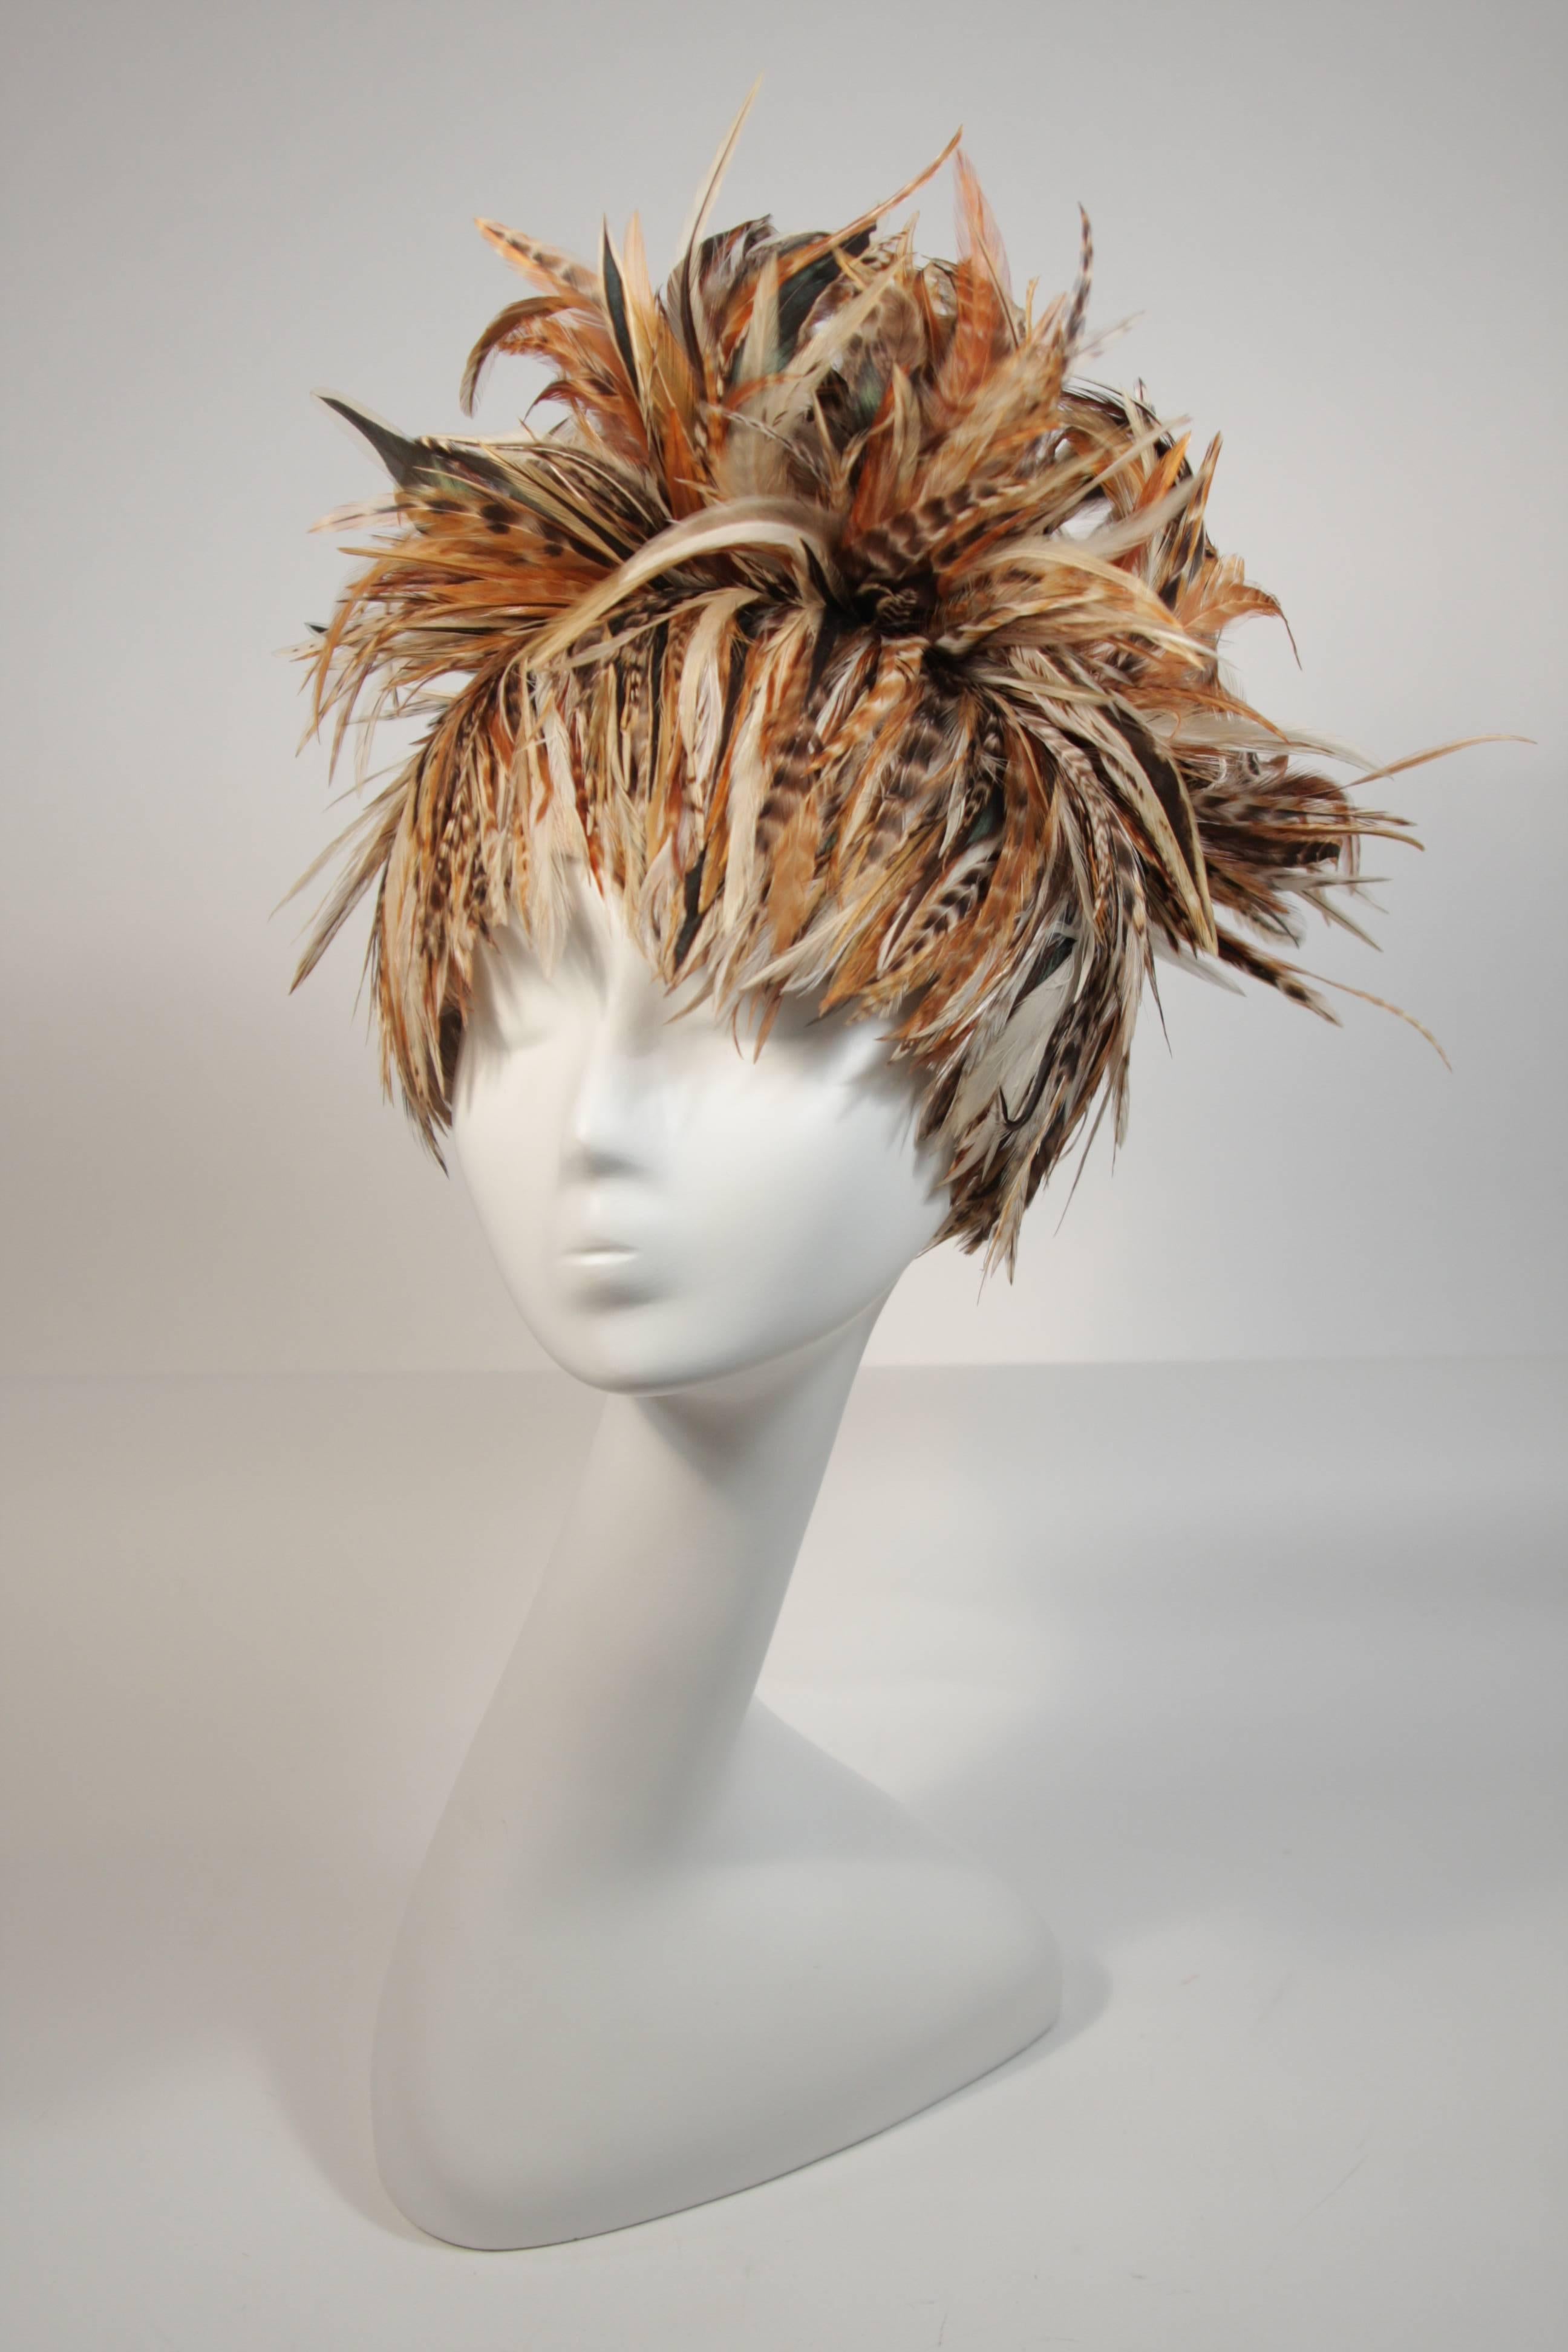 This Jack McConnell hat features a neutral color combination in hues of brown, oatmeal, and orange. This is an absolutely stellar hat in excellent condition. Such a burst of fantasy, an absolutely delectable design. Made in USA.

**Please